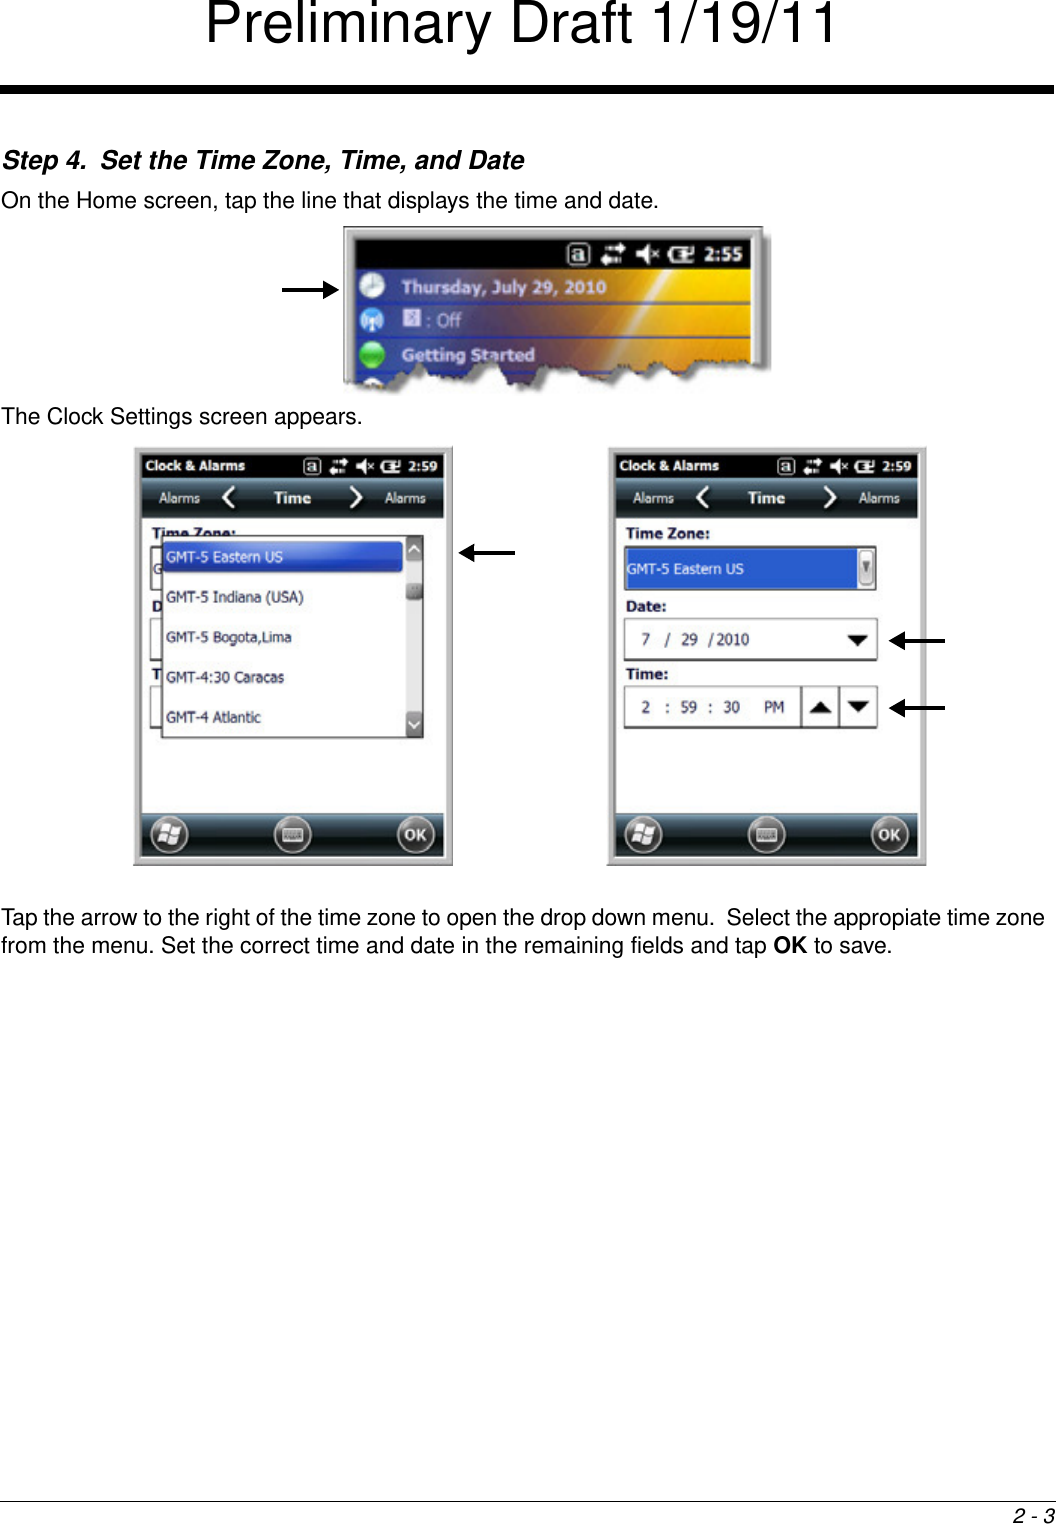 2 - 3Step 4. Set the Time Zone, Time, and DateOn the Home screen, tap the line that displays the time and date.The Clock Settings screen appears.Tap the arrow to the right of the time zone to open the drop down menu.  Select the appropiate time zone from the menu. Set the correct time and date in the remaining fields and tap OK to save.Preliminary Draft 1/19/11